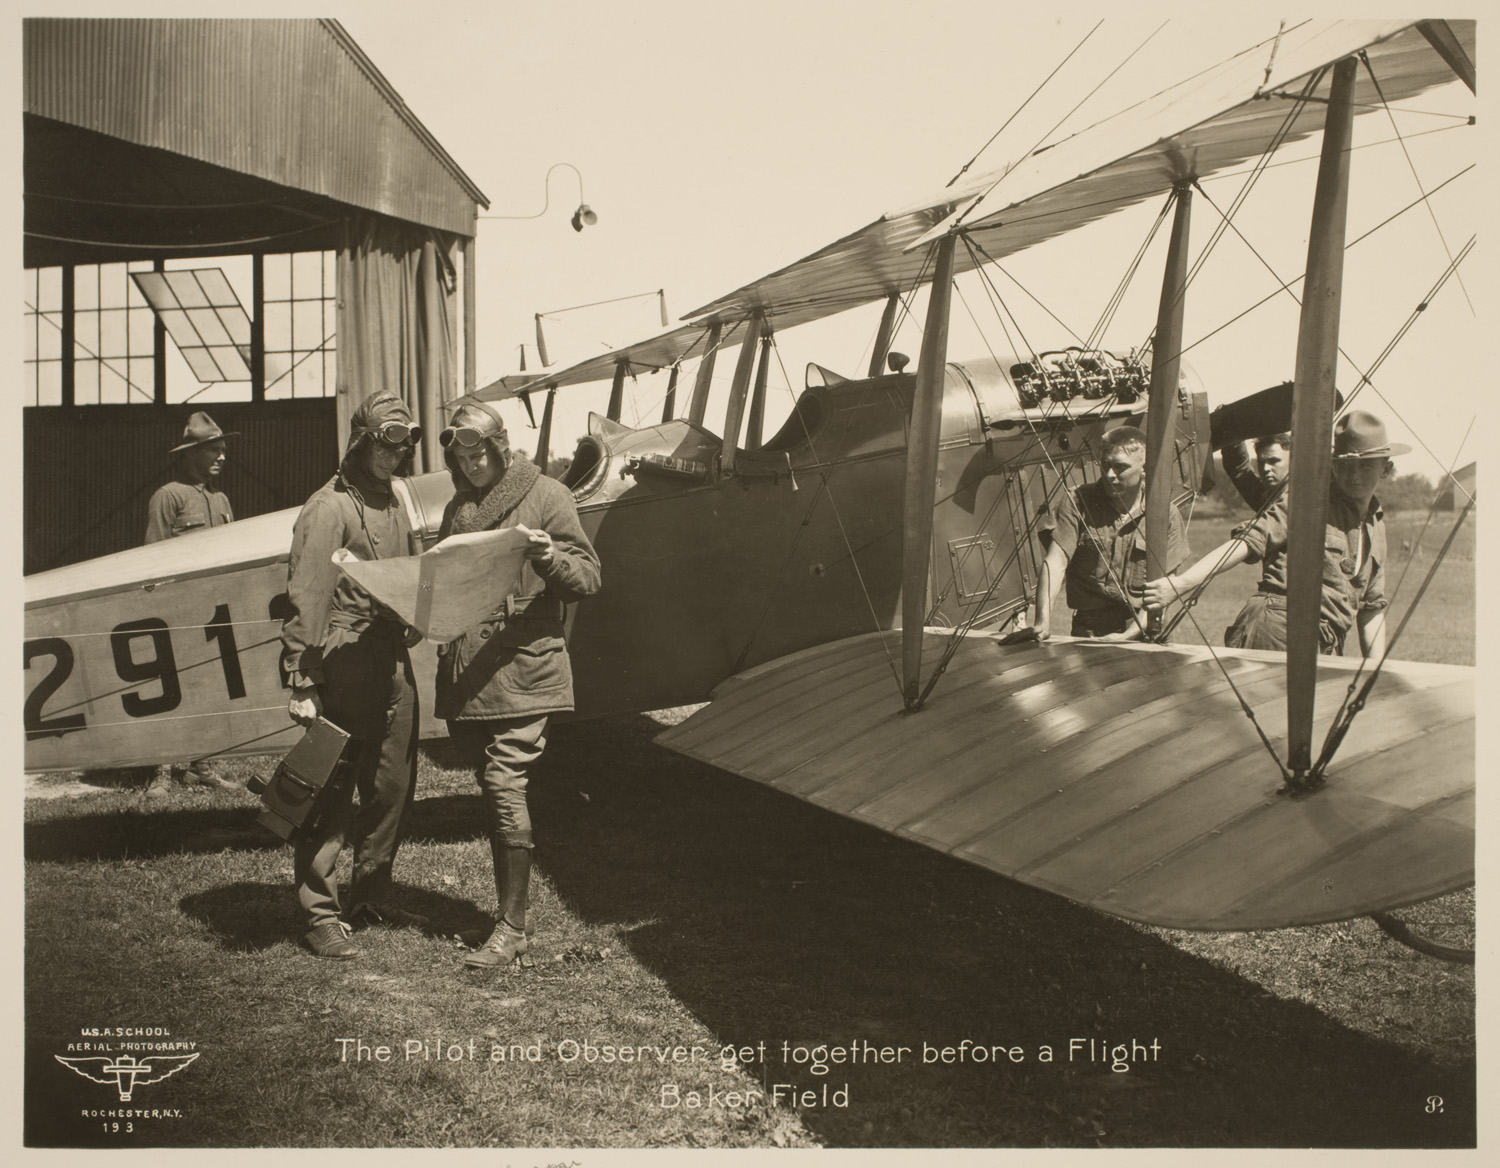 The Pilot and Observer get together before a Flight, Baker Field, 1918